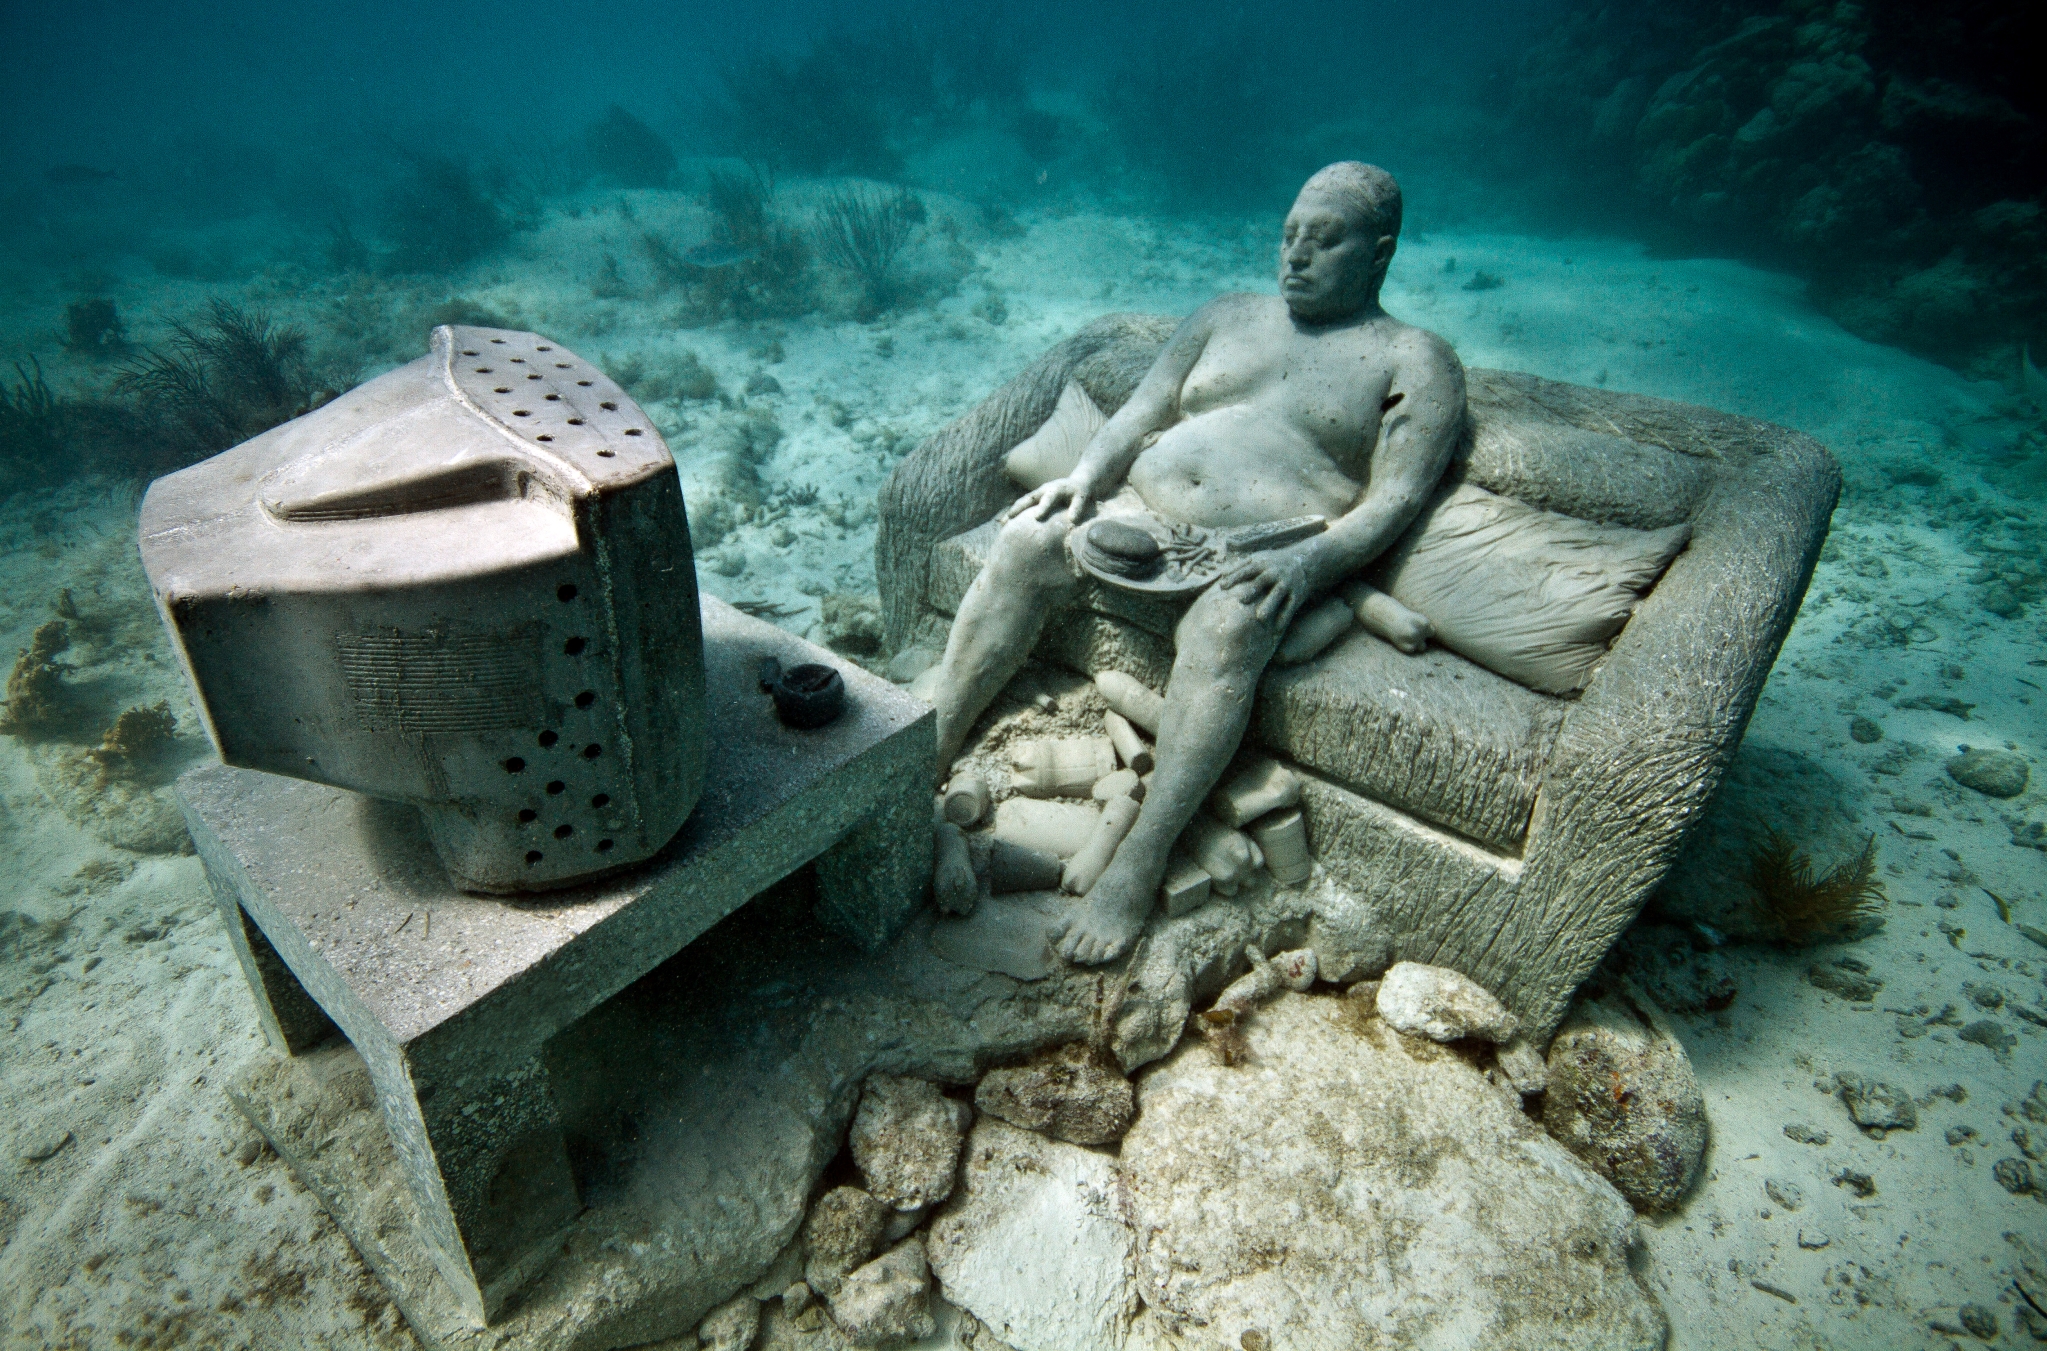 An underwater sculpture by Jason Decaires Taylor.